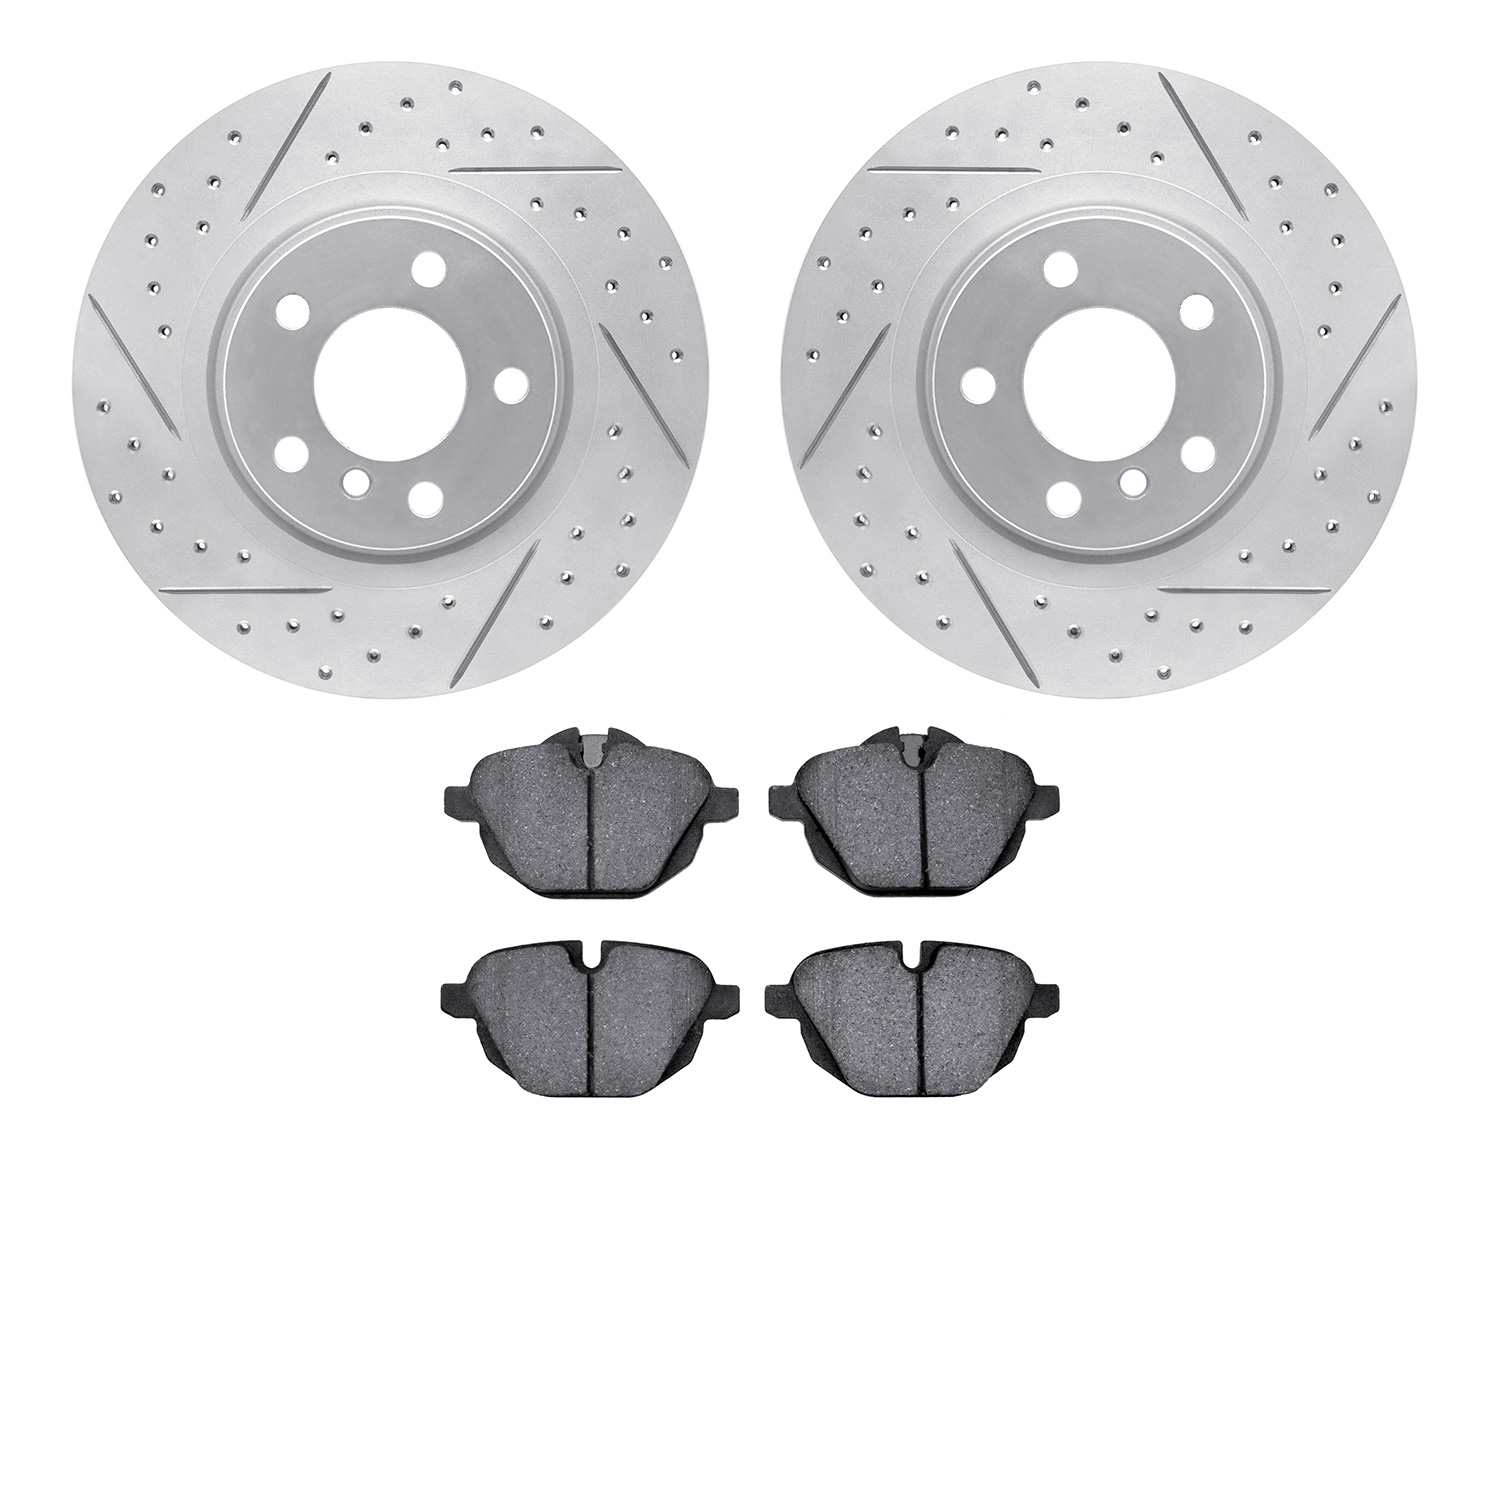 2502-31130 Geoperformance Drilled/Slotted Rotors w/5000 Advanced Brake Pads Kit, 2015-2018 BMW, Position: Rear